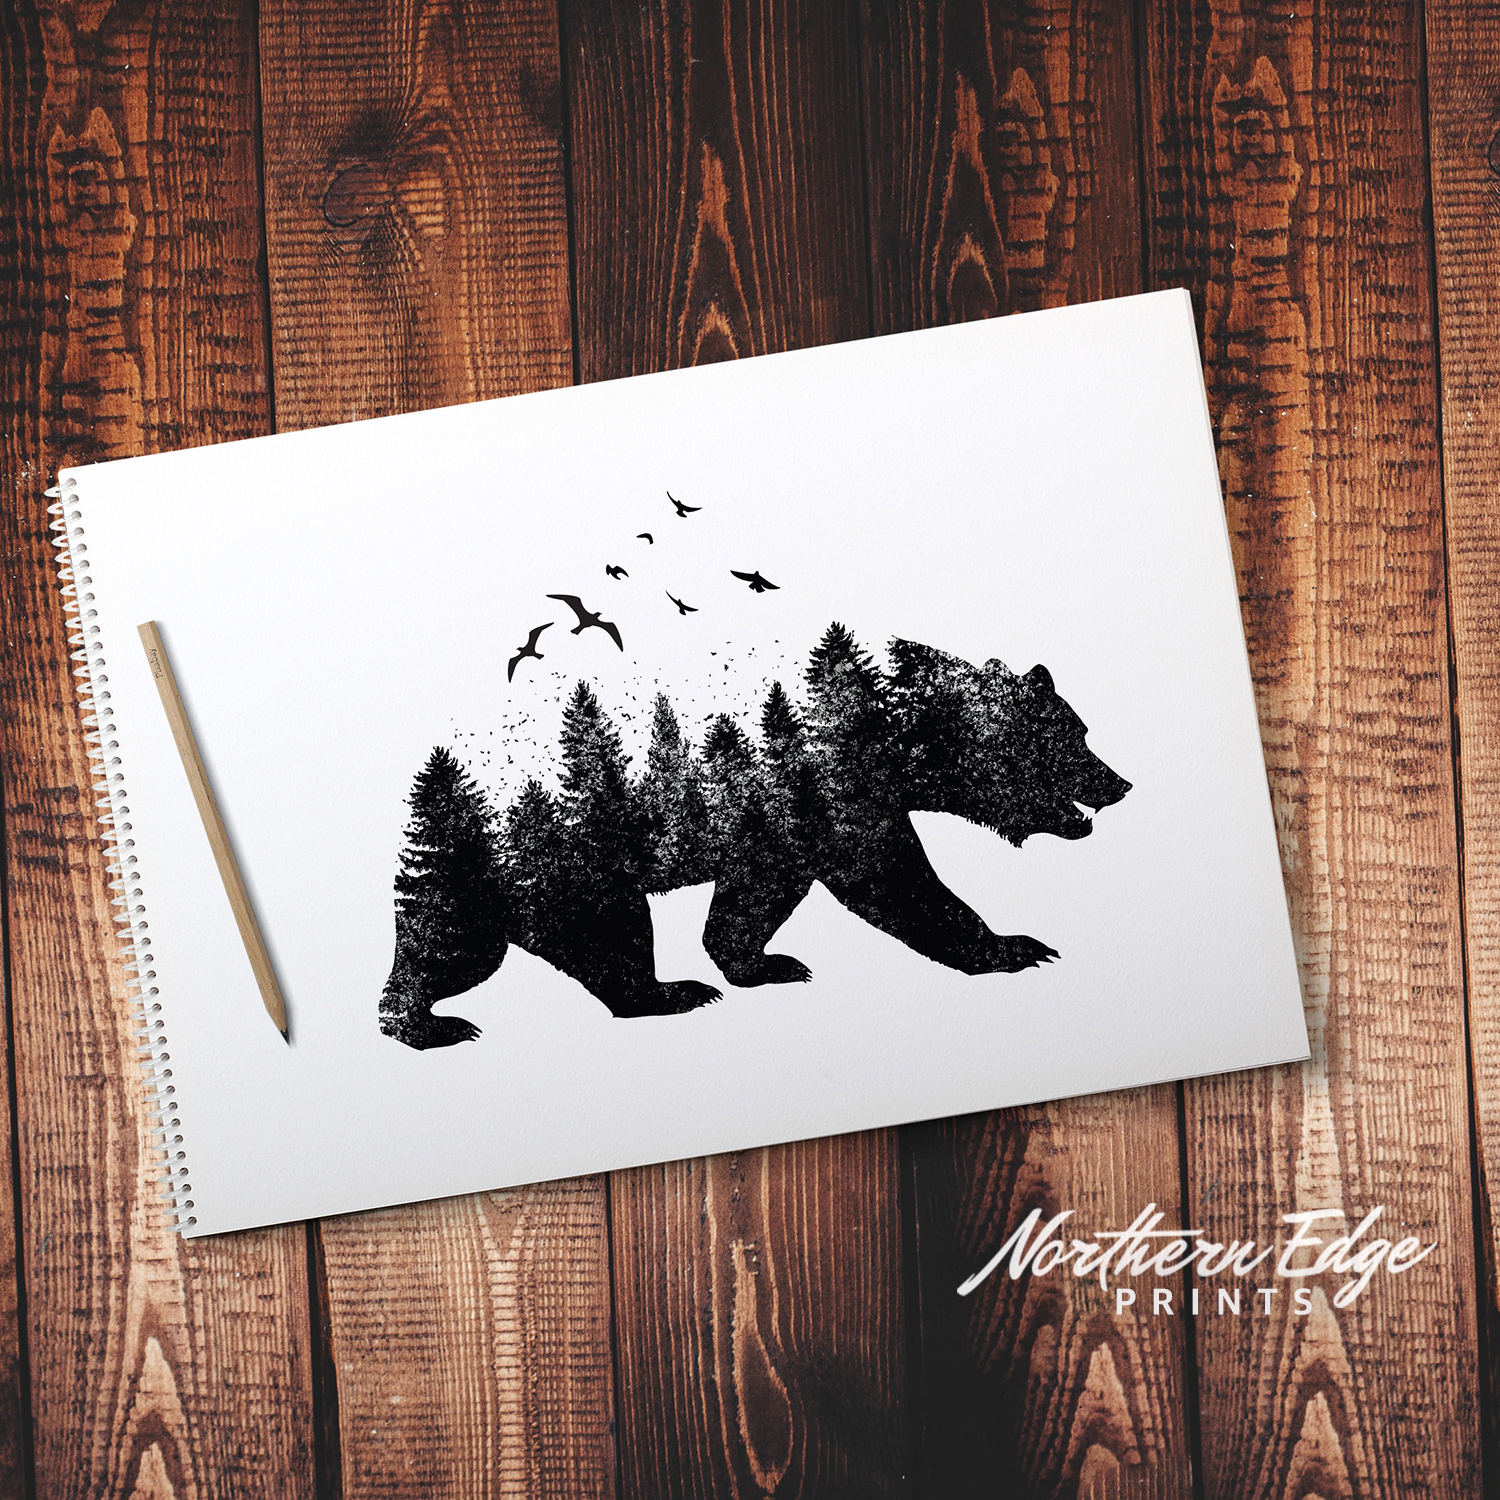 Northern Edge Prints | Affordable Home Wall Decor for Every Unique Style